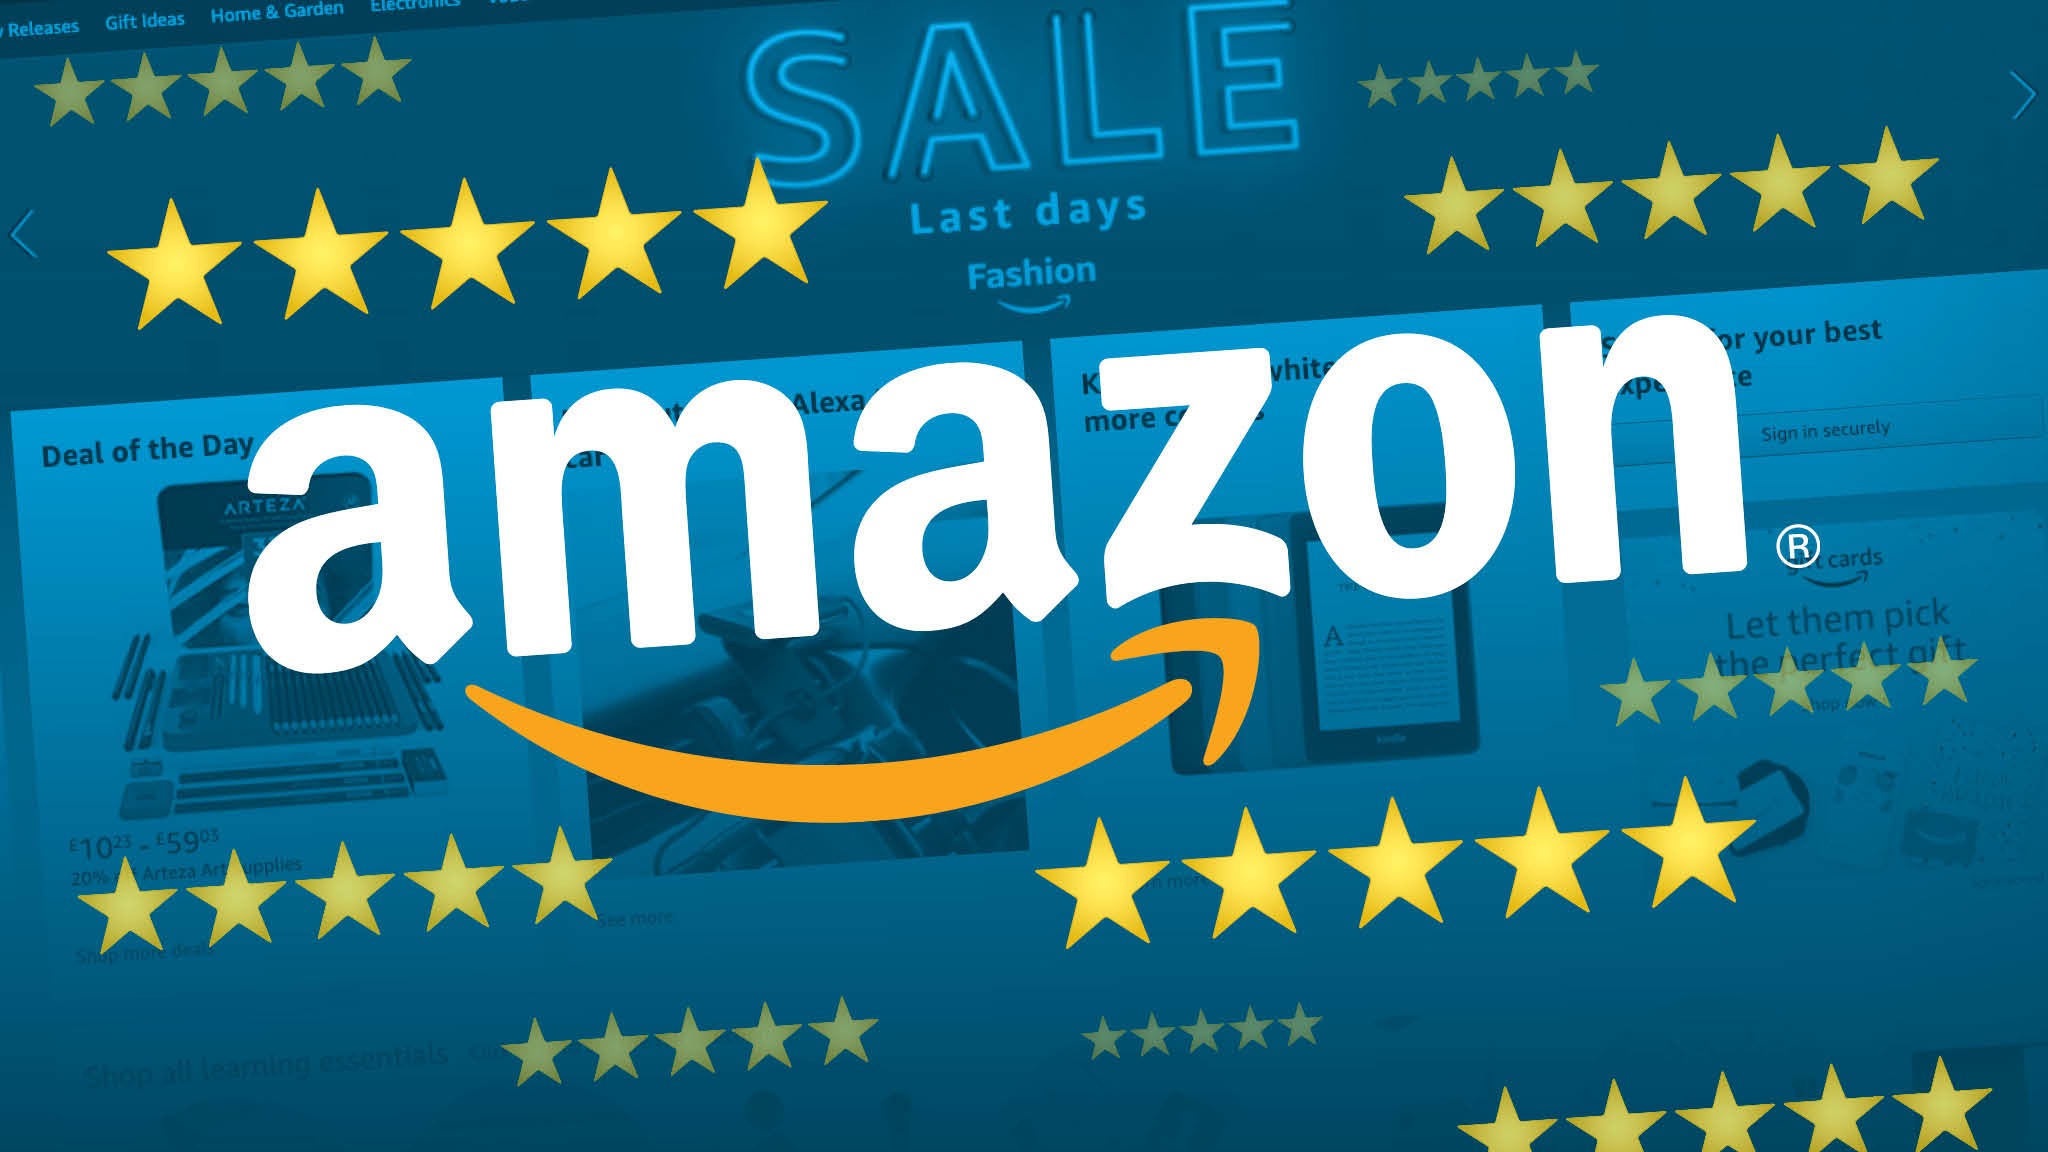 Trust Issues: Why You Should Never Buy Fake Reviews on Amazon